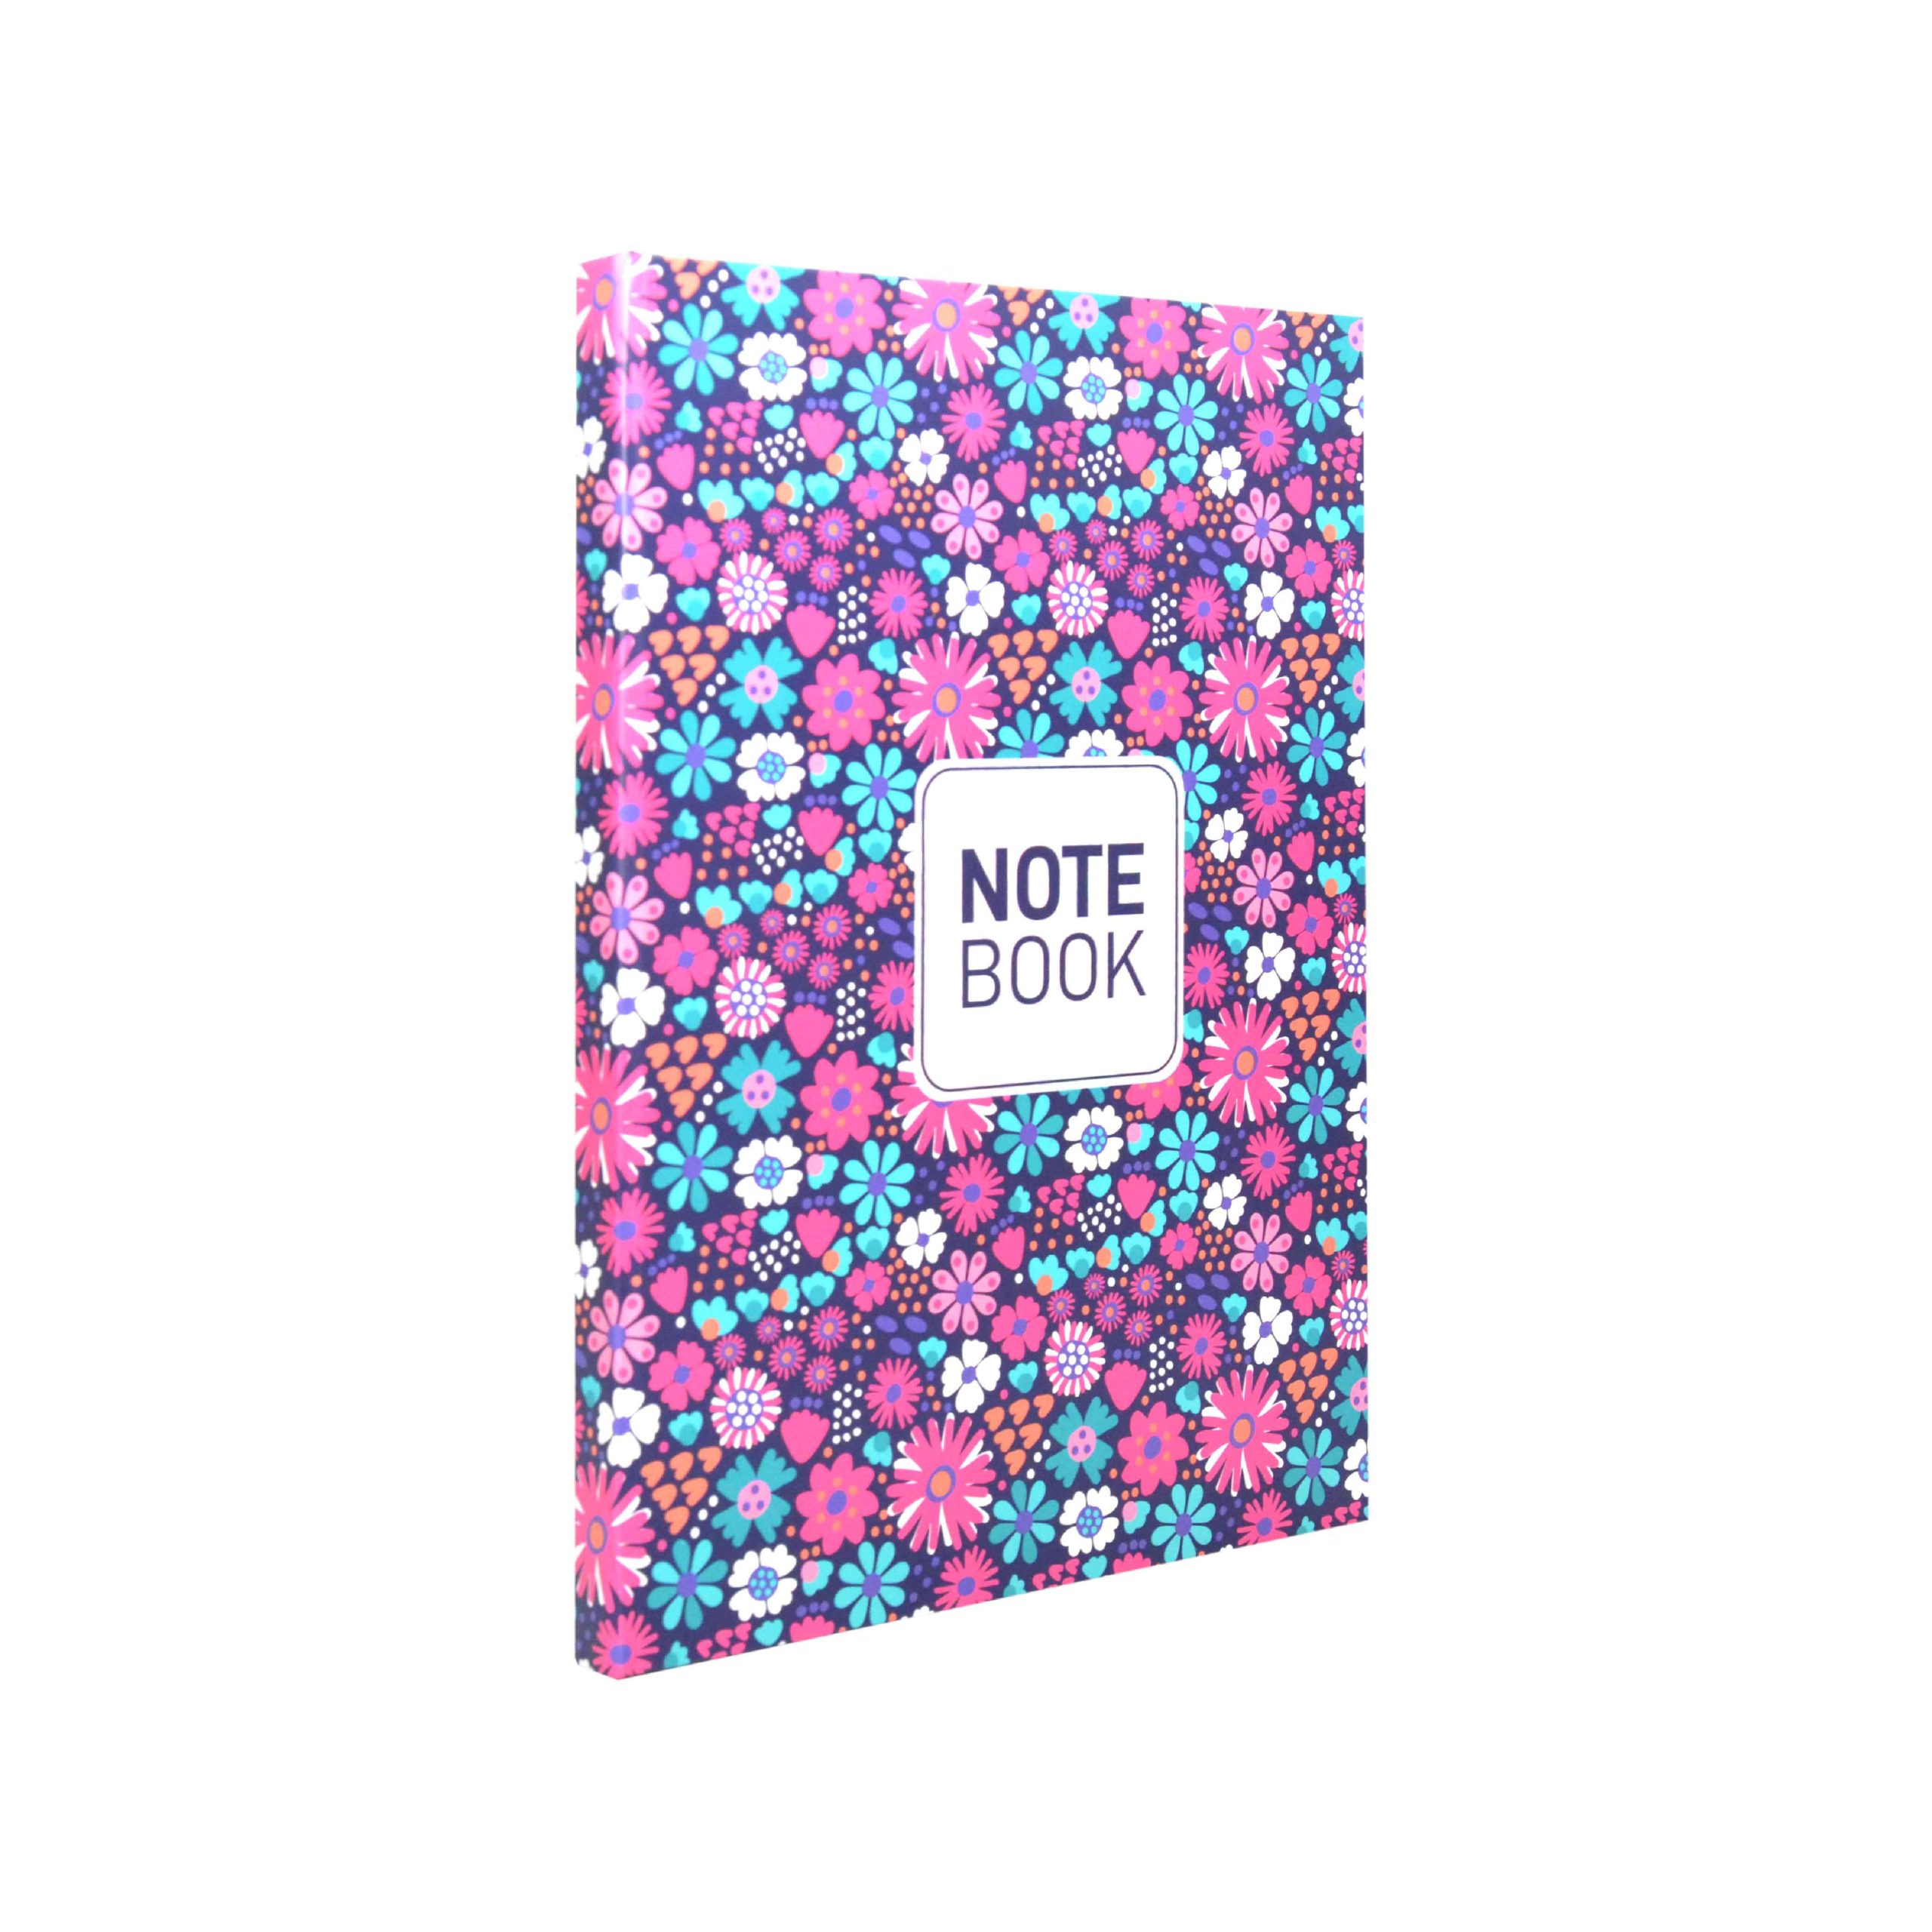 ST1410 Flower Garden A5 Diary Notebook 01 scaled